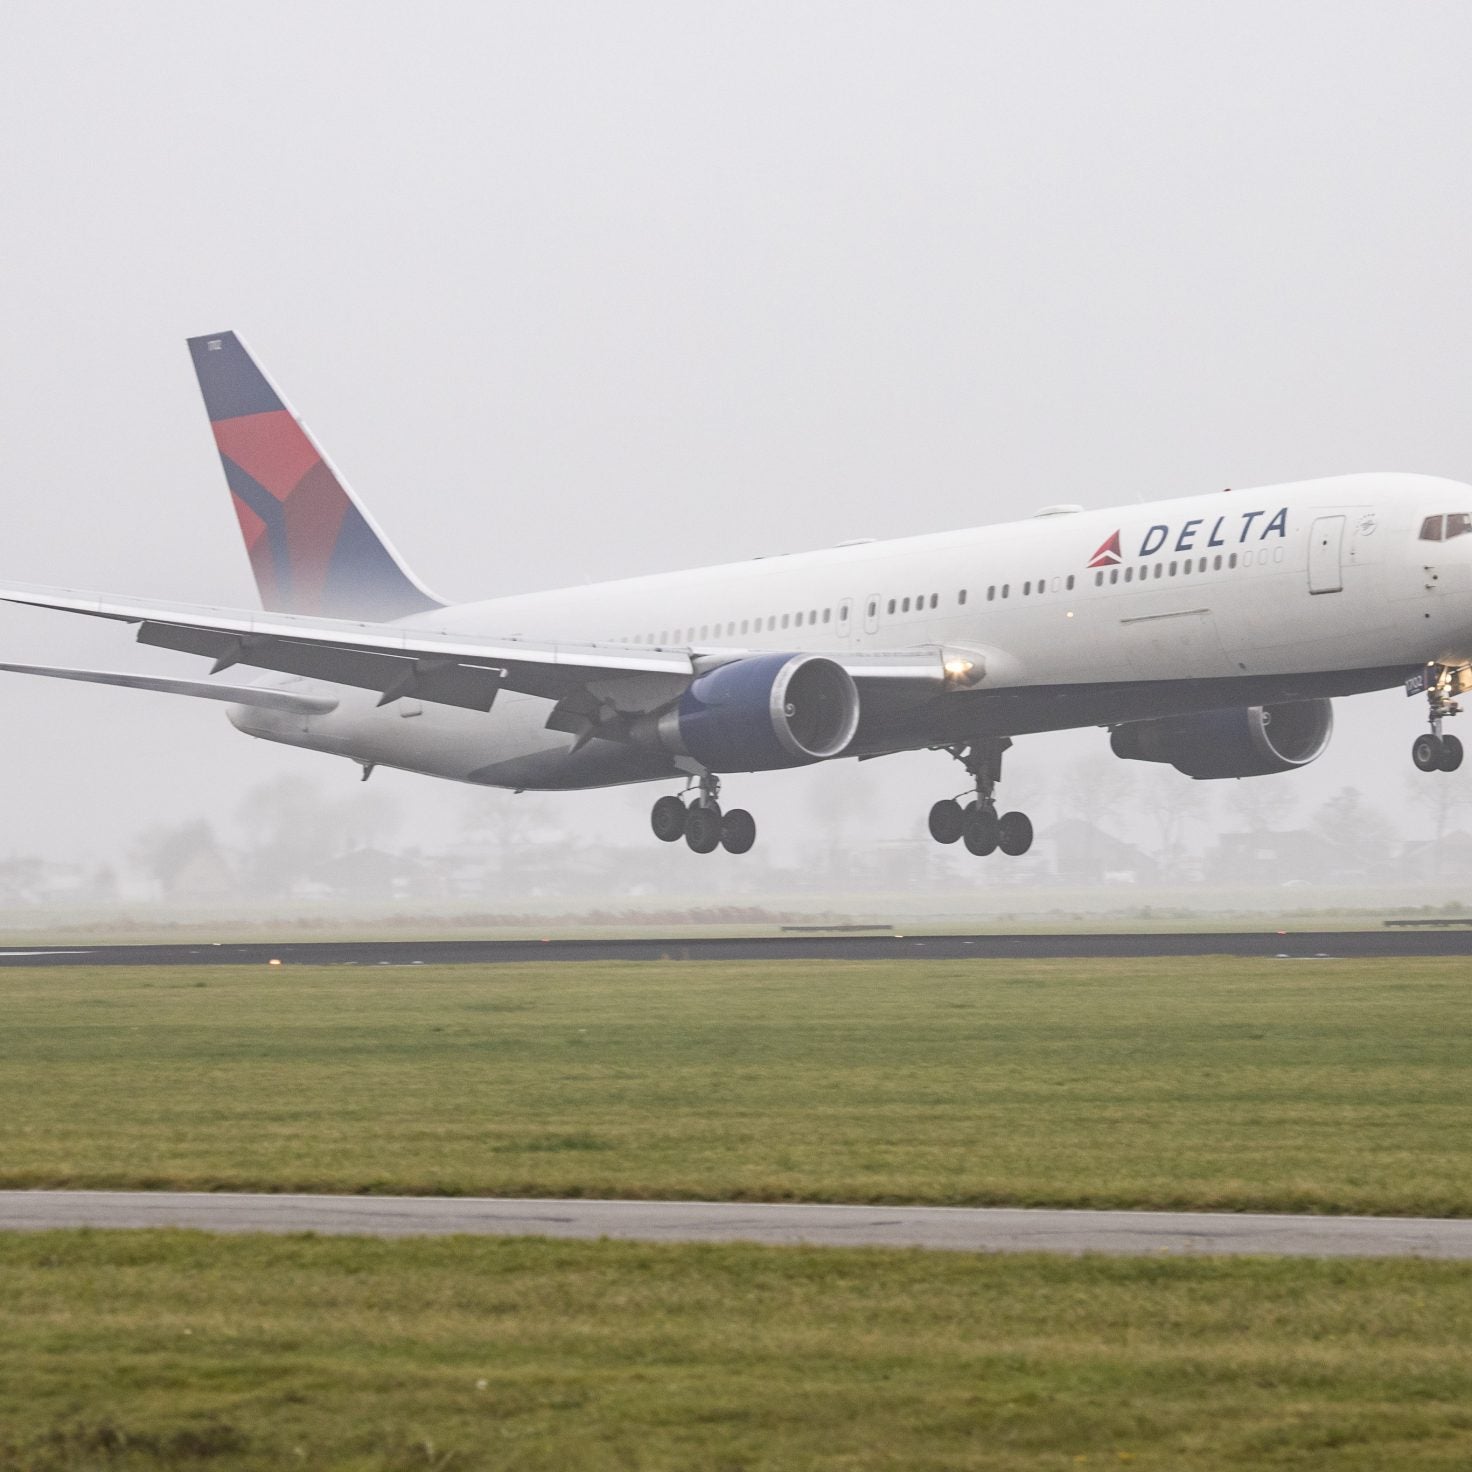 Delta, JetBlue Waive Change Fees For Dominican Republic Flights Amidst Tourist Deaths